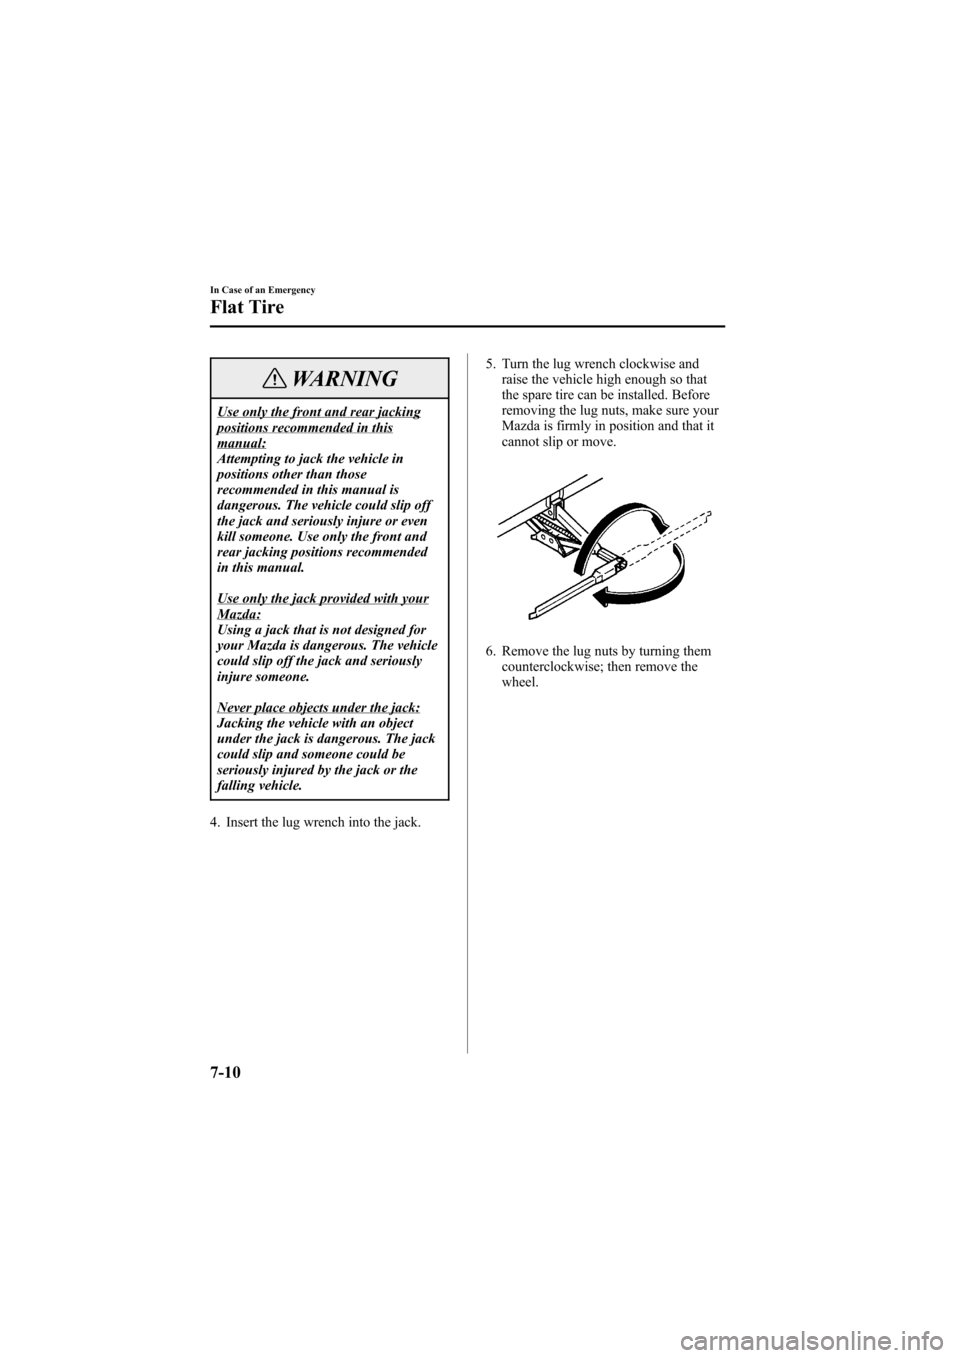 MAZDA MODEL 6 2007  Owners Manual (in English) Black plate (252,1)
WARNING
Use only the front and rear jackingpositions recommended in thismanual:
Attempting to jack the vehicle in
positions other than those
recommended in this manual is
dangerous